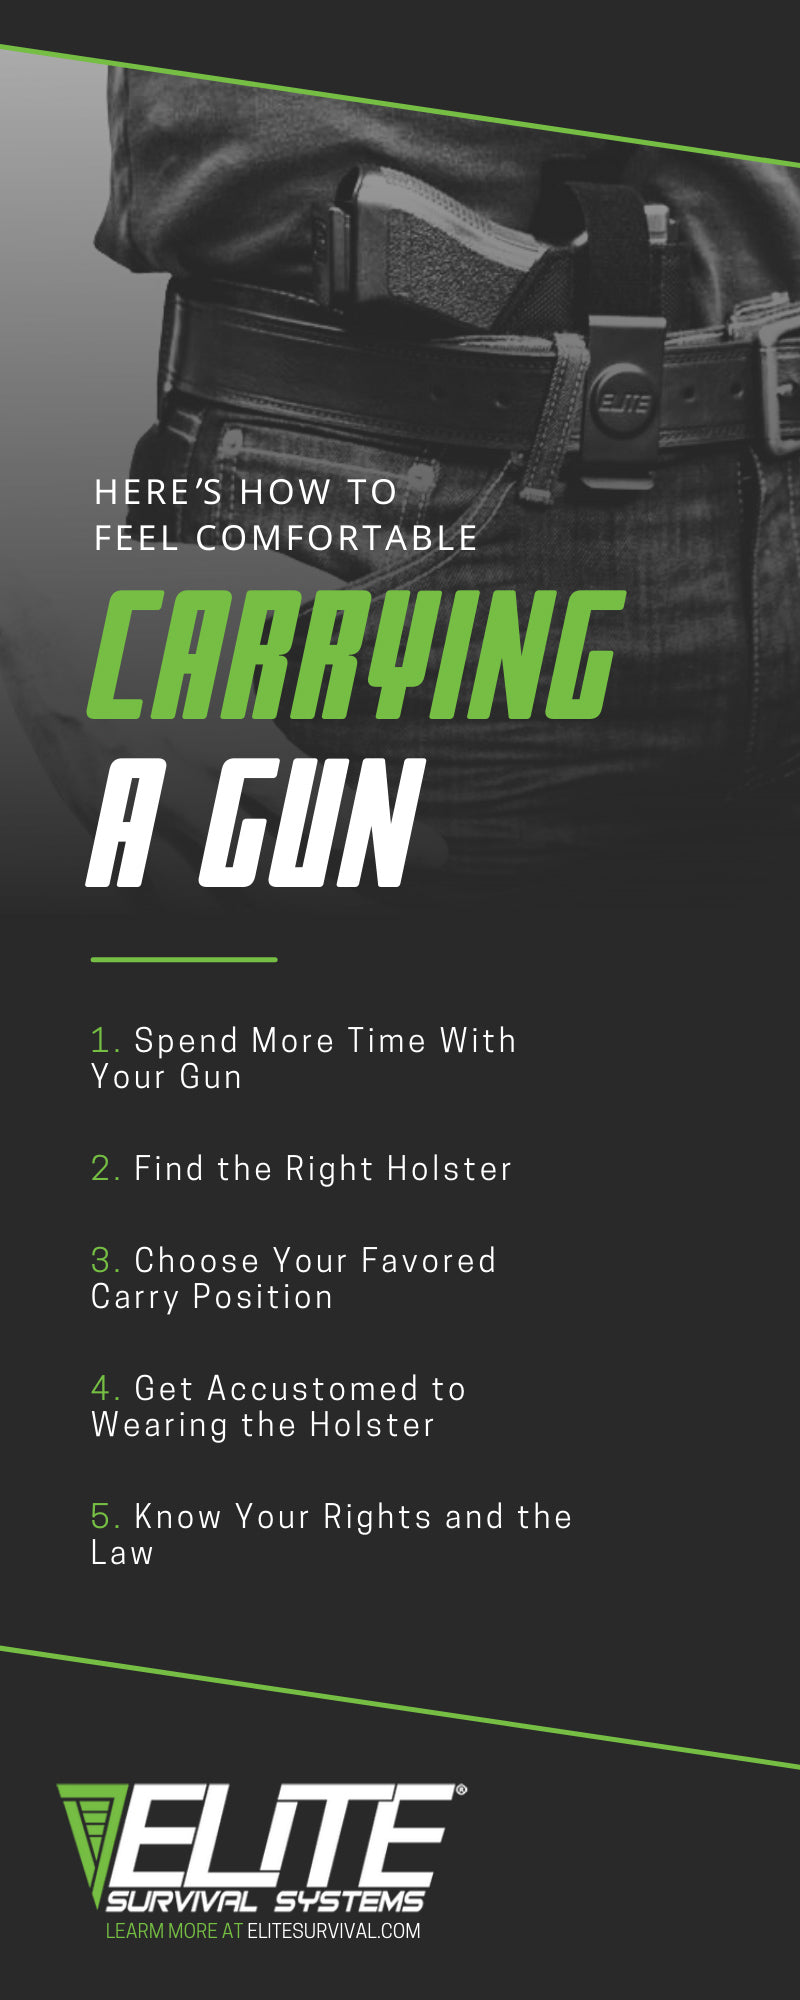 Here’s How To Feel Comfortable Carrying a Gun